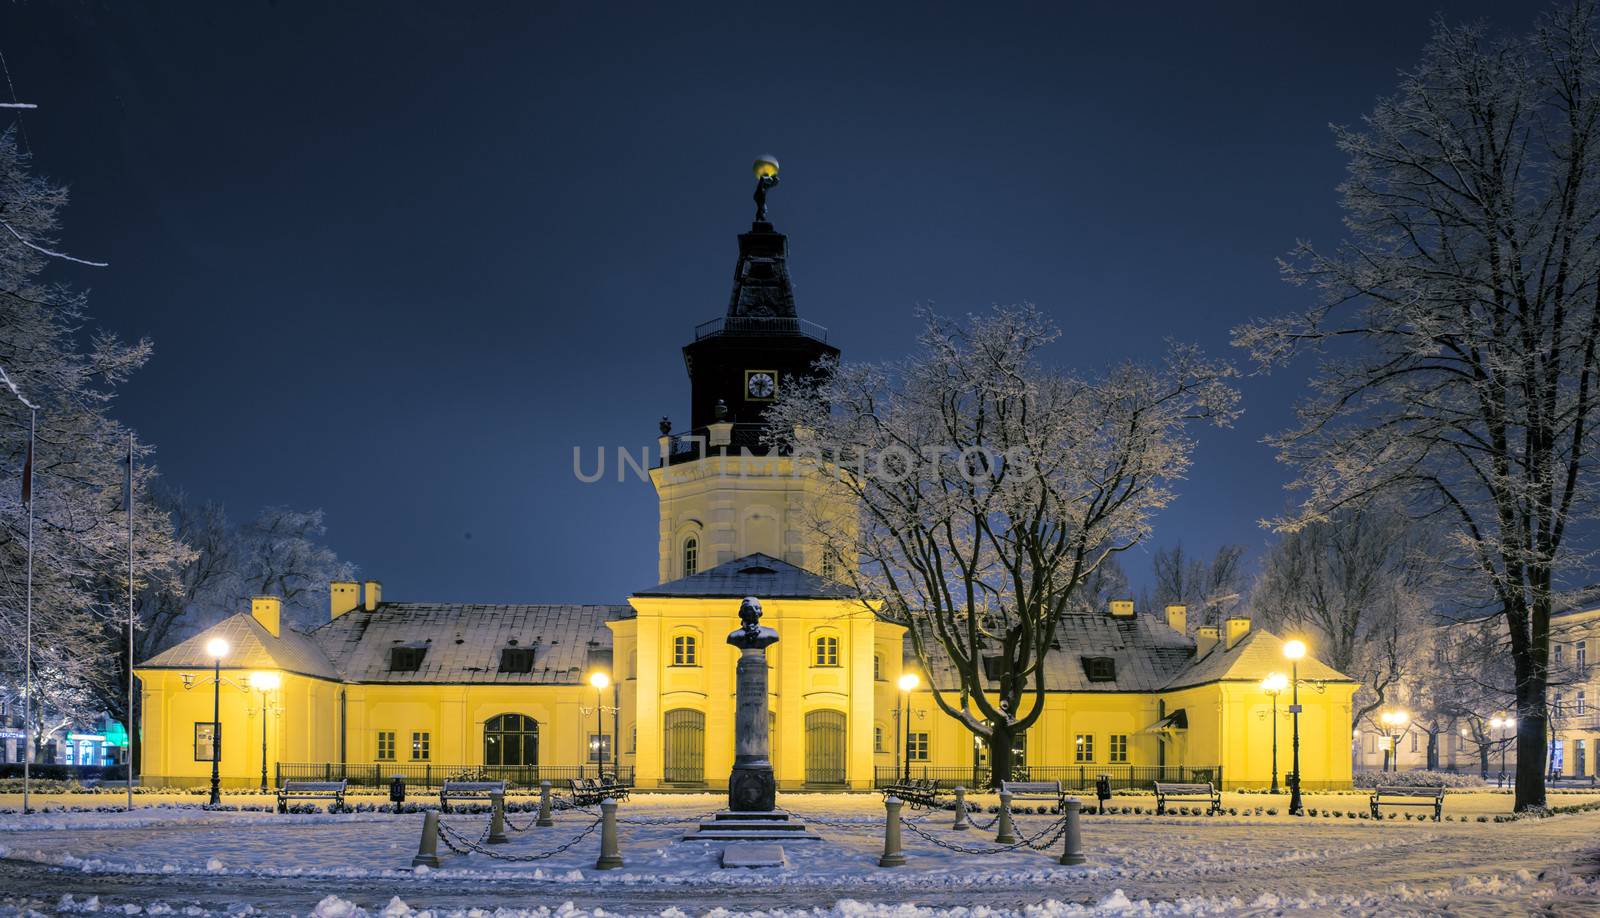 Town Hall in Siedlce, Poland by jarek78